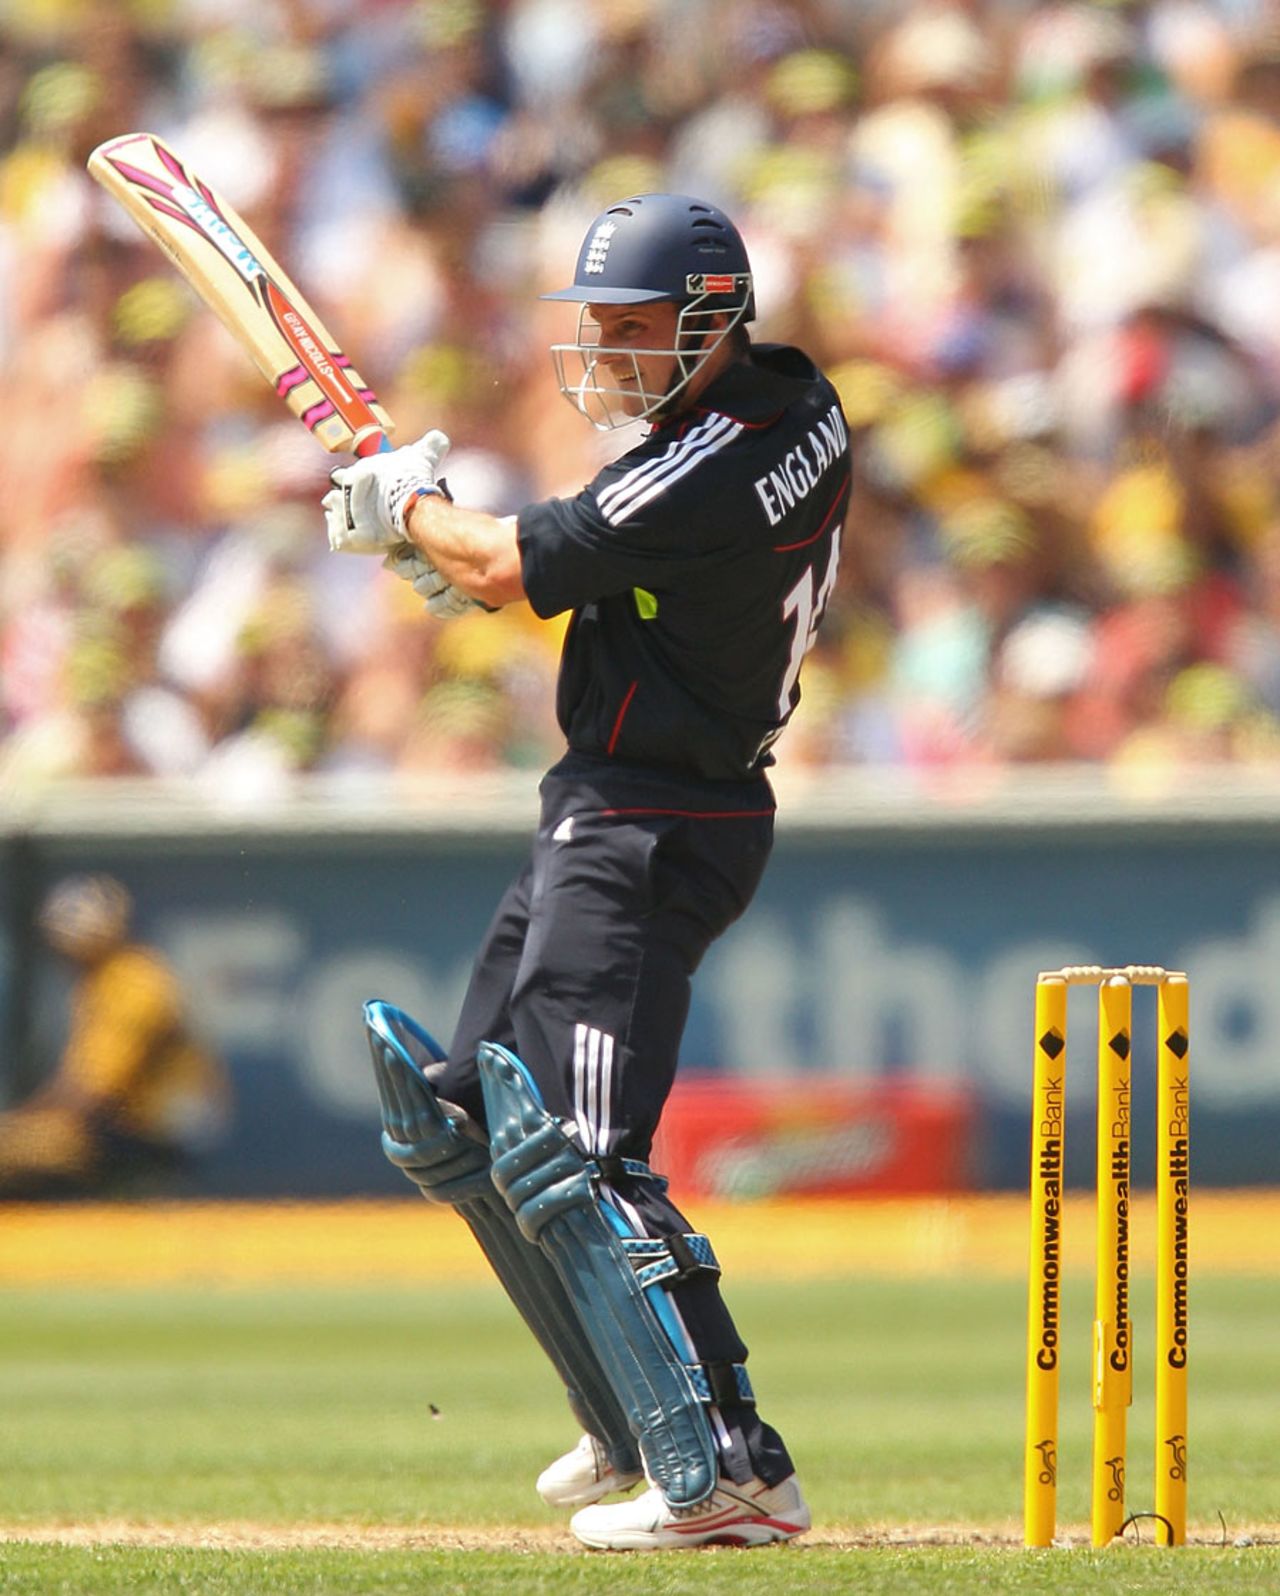 Andrew Strauss plays his favourite square cut as he makes 63, Australia v England, 1st ODI, Melbourne, January 16, 2010